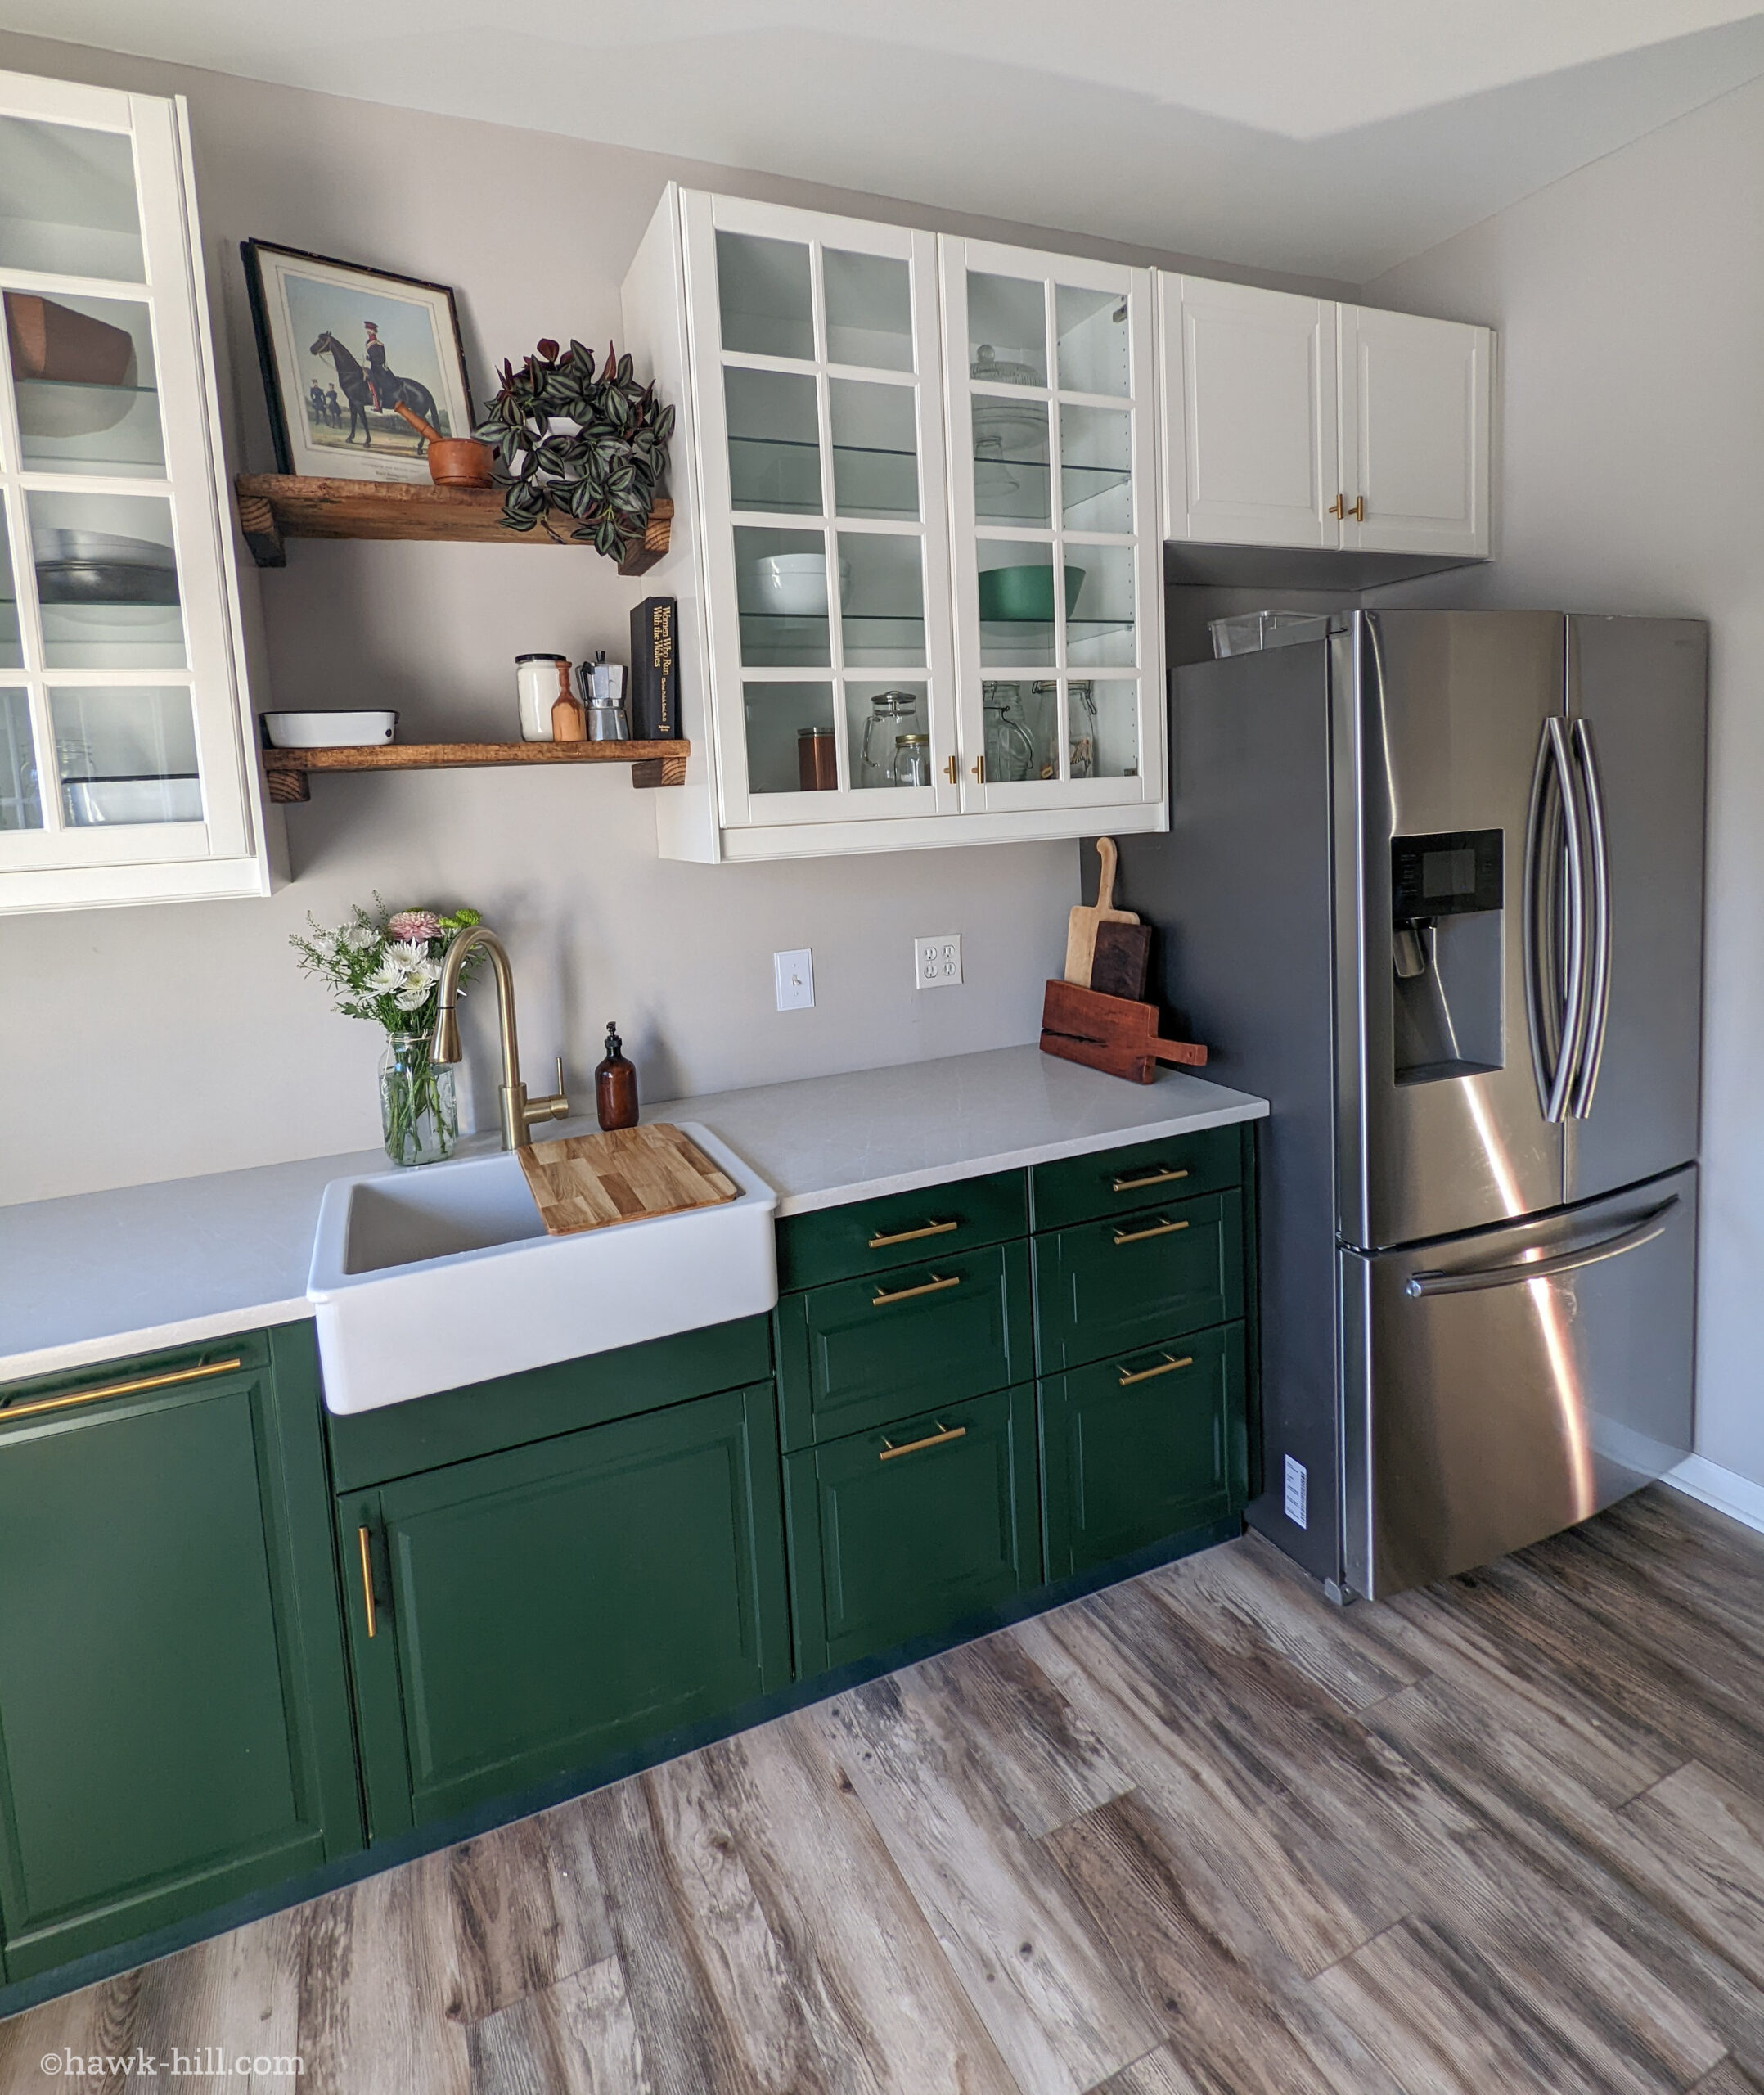 A kitchen with gold fixtures, forest green cabinets on the bottom, and a combination of wood open shelving and glass front white cabinets on top.